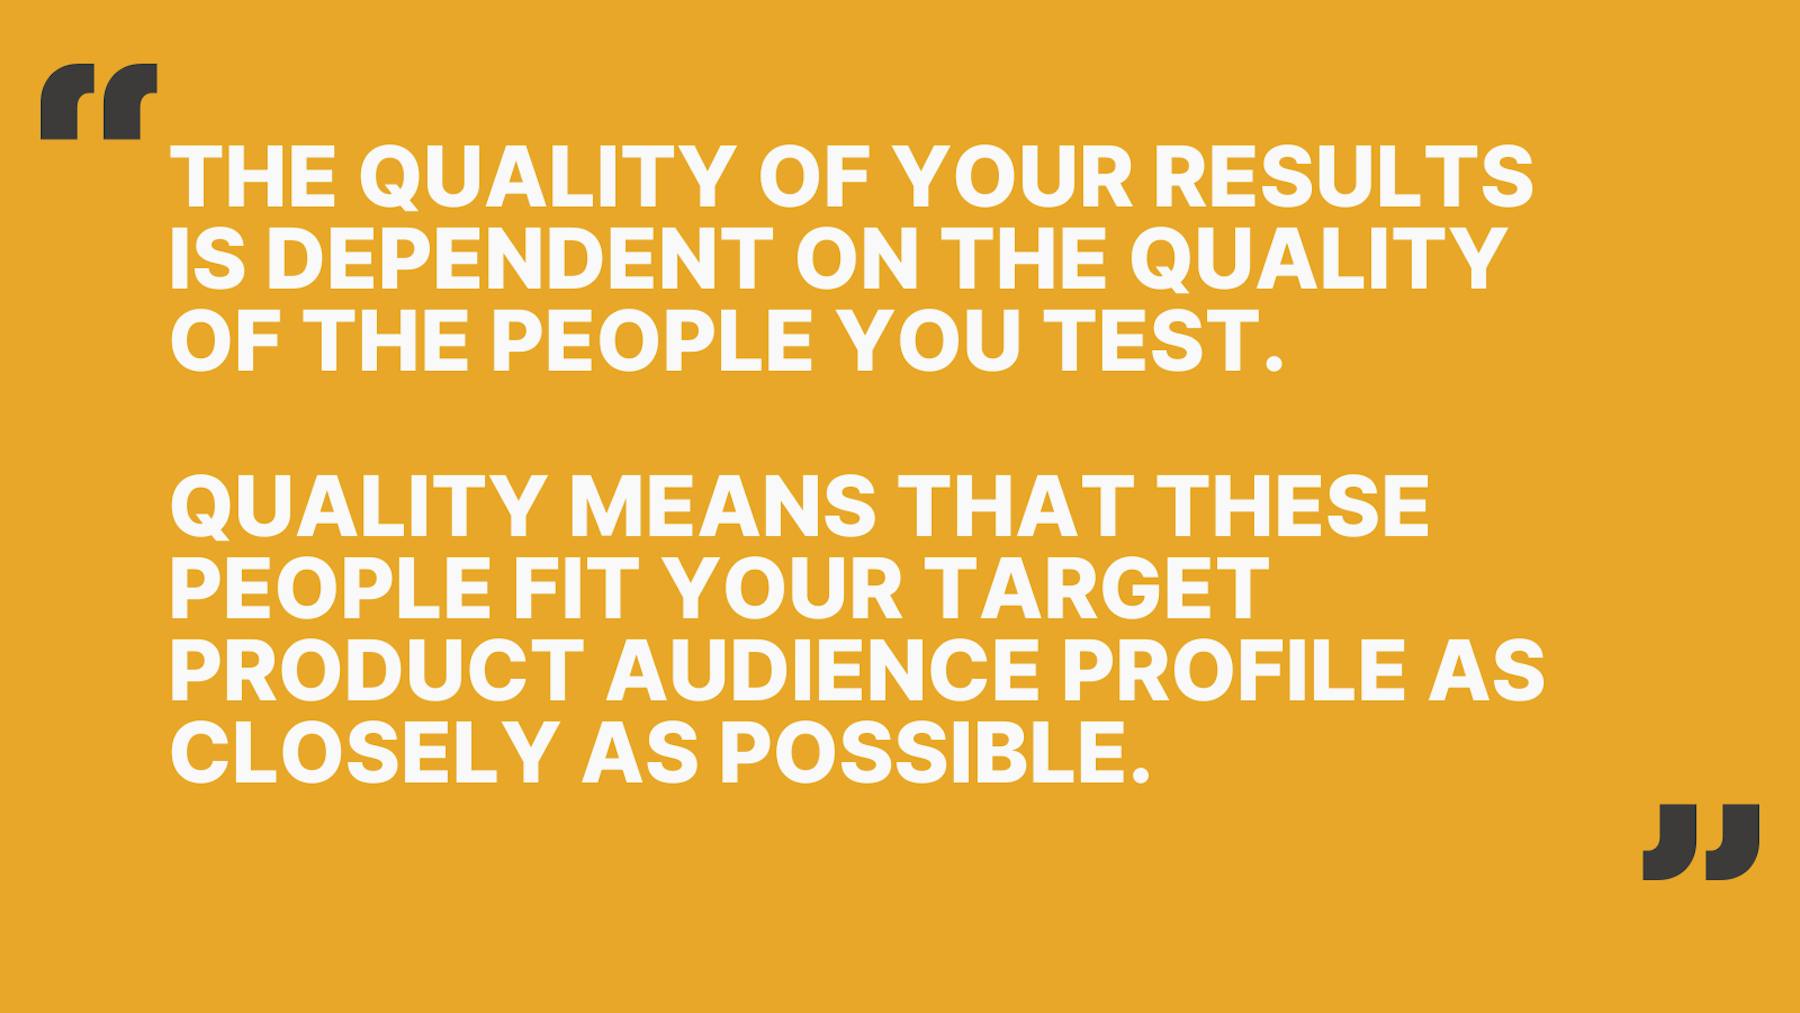 The quality of your results is dependent on the quality of the people you test. Quality means that these people fit your target product audience profile as closely as possible.